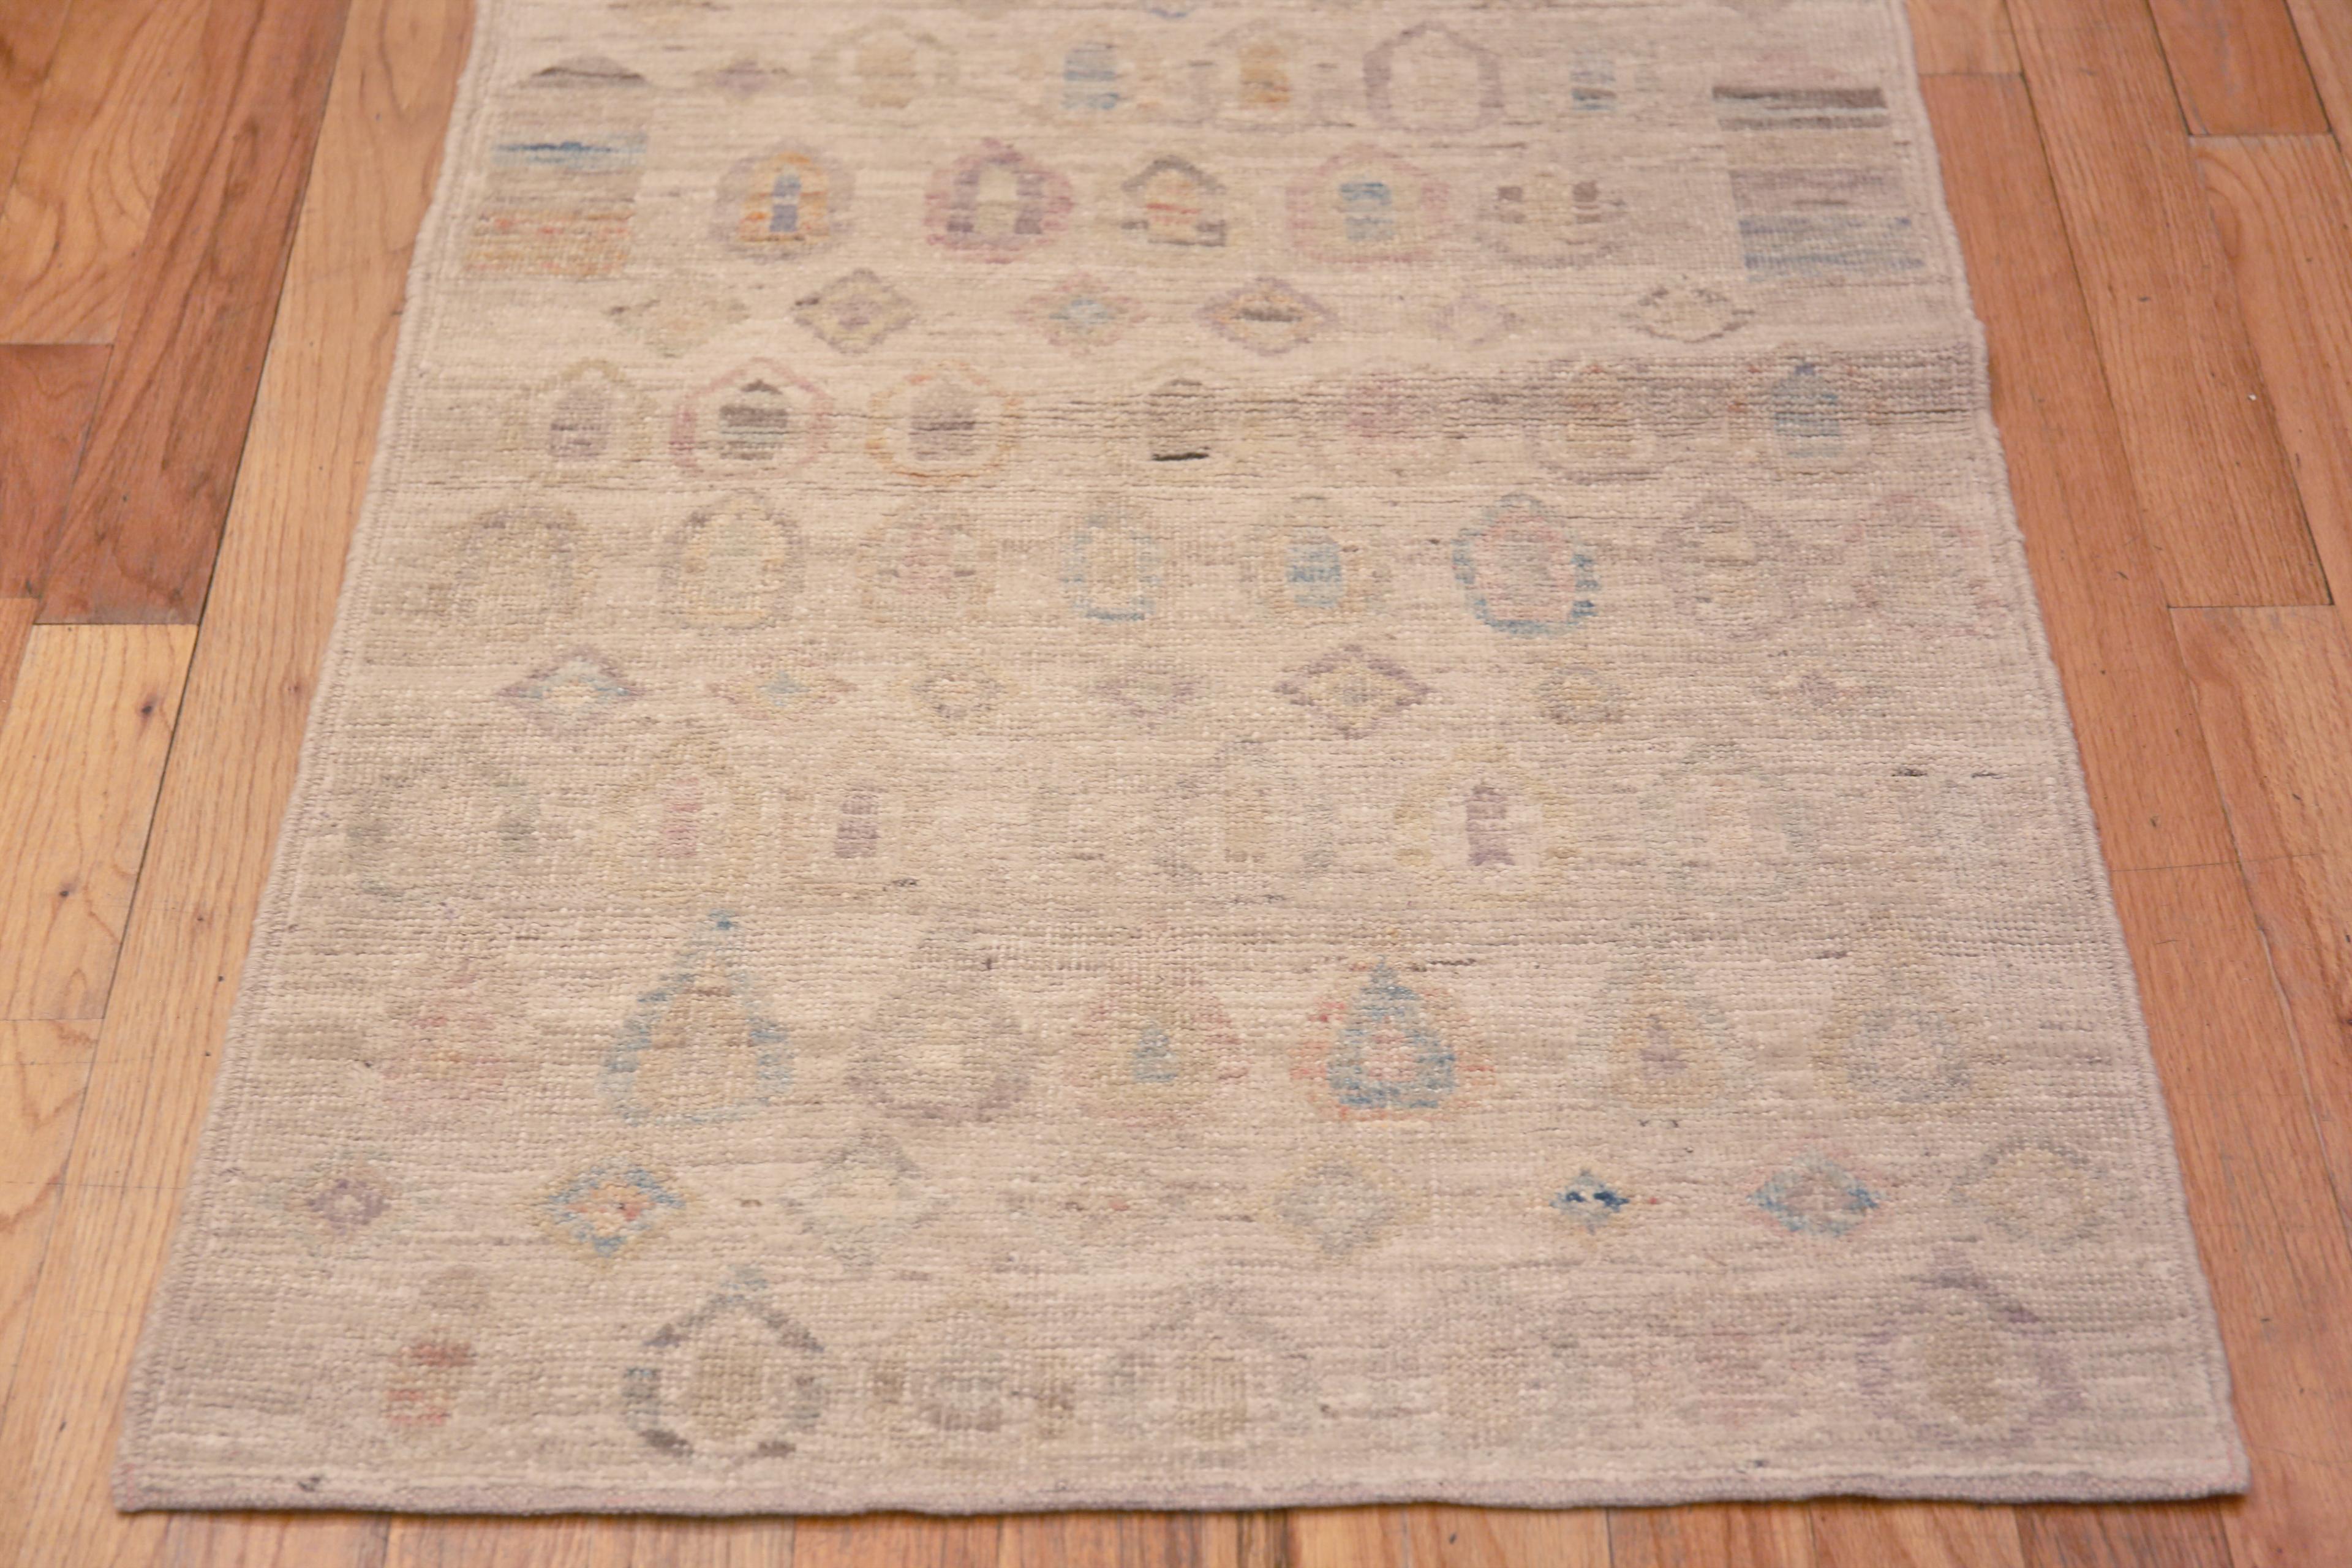 Beautifully Decorative Light Cream Color Soft Washed Out Tribal Geometric Pattern Modern Hallway Runner Rug, Country Of Origin: Central Asia, Circa Date: Modern Rug 